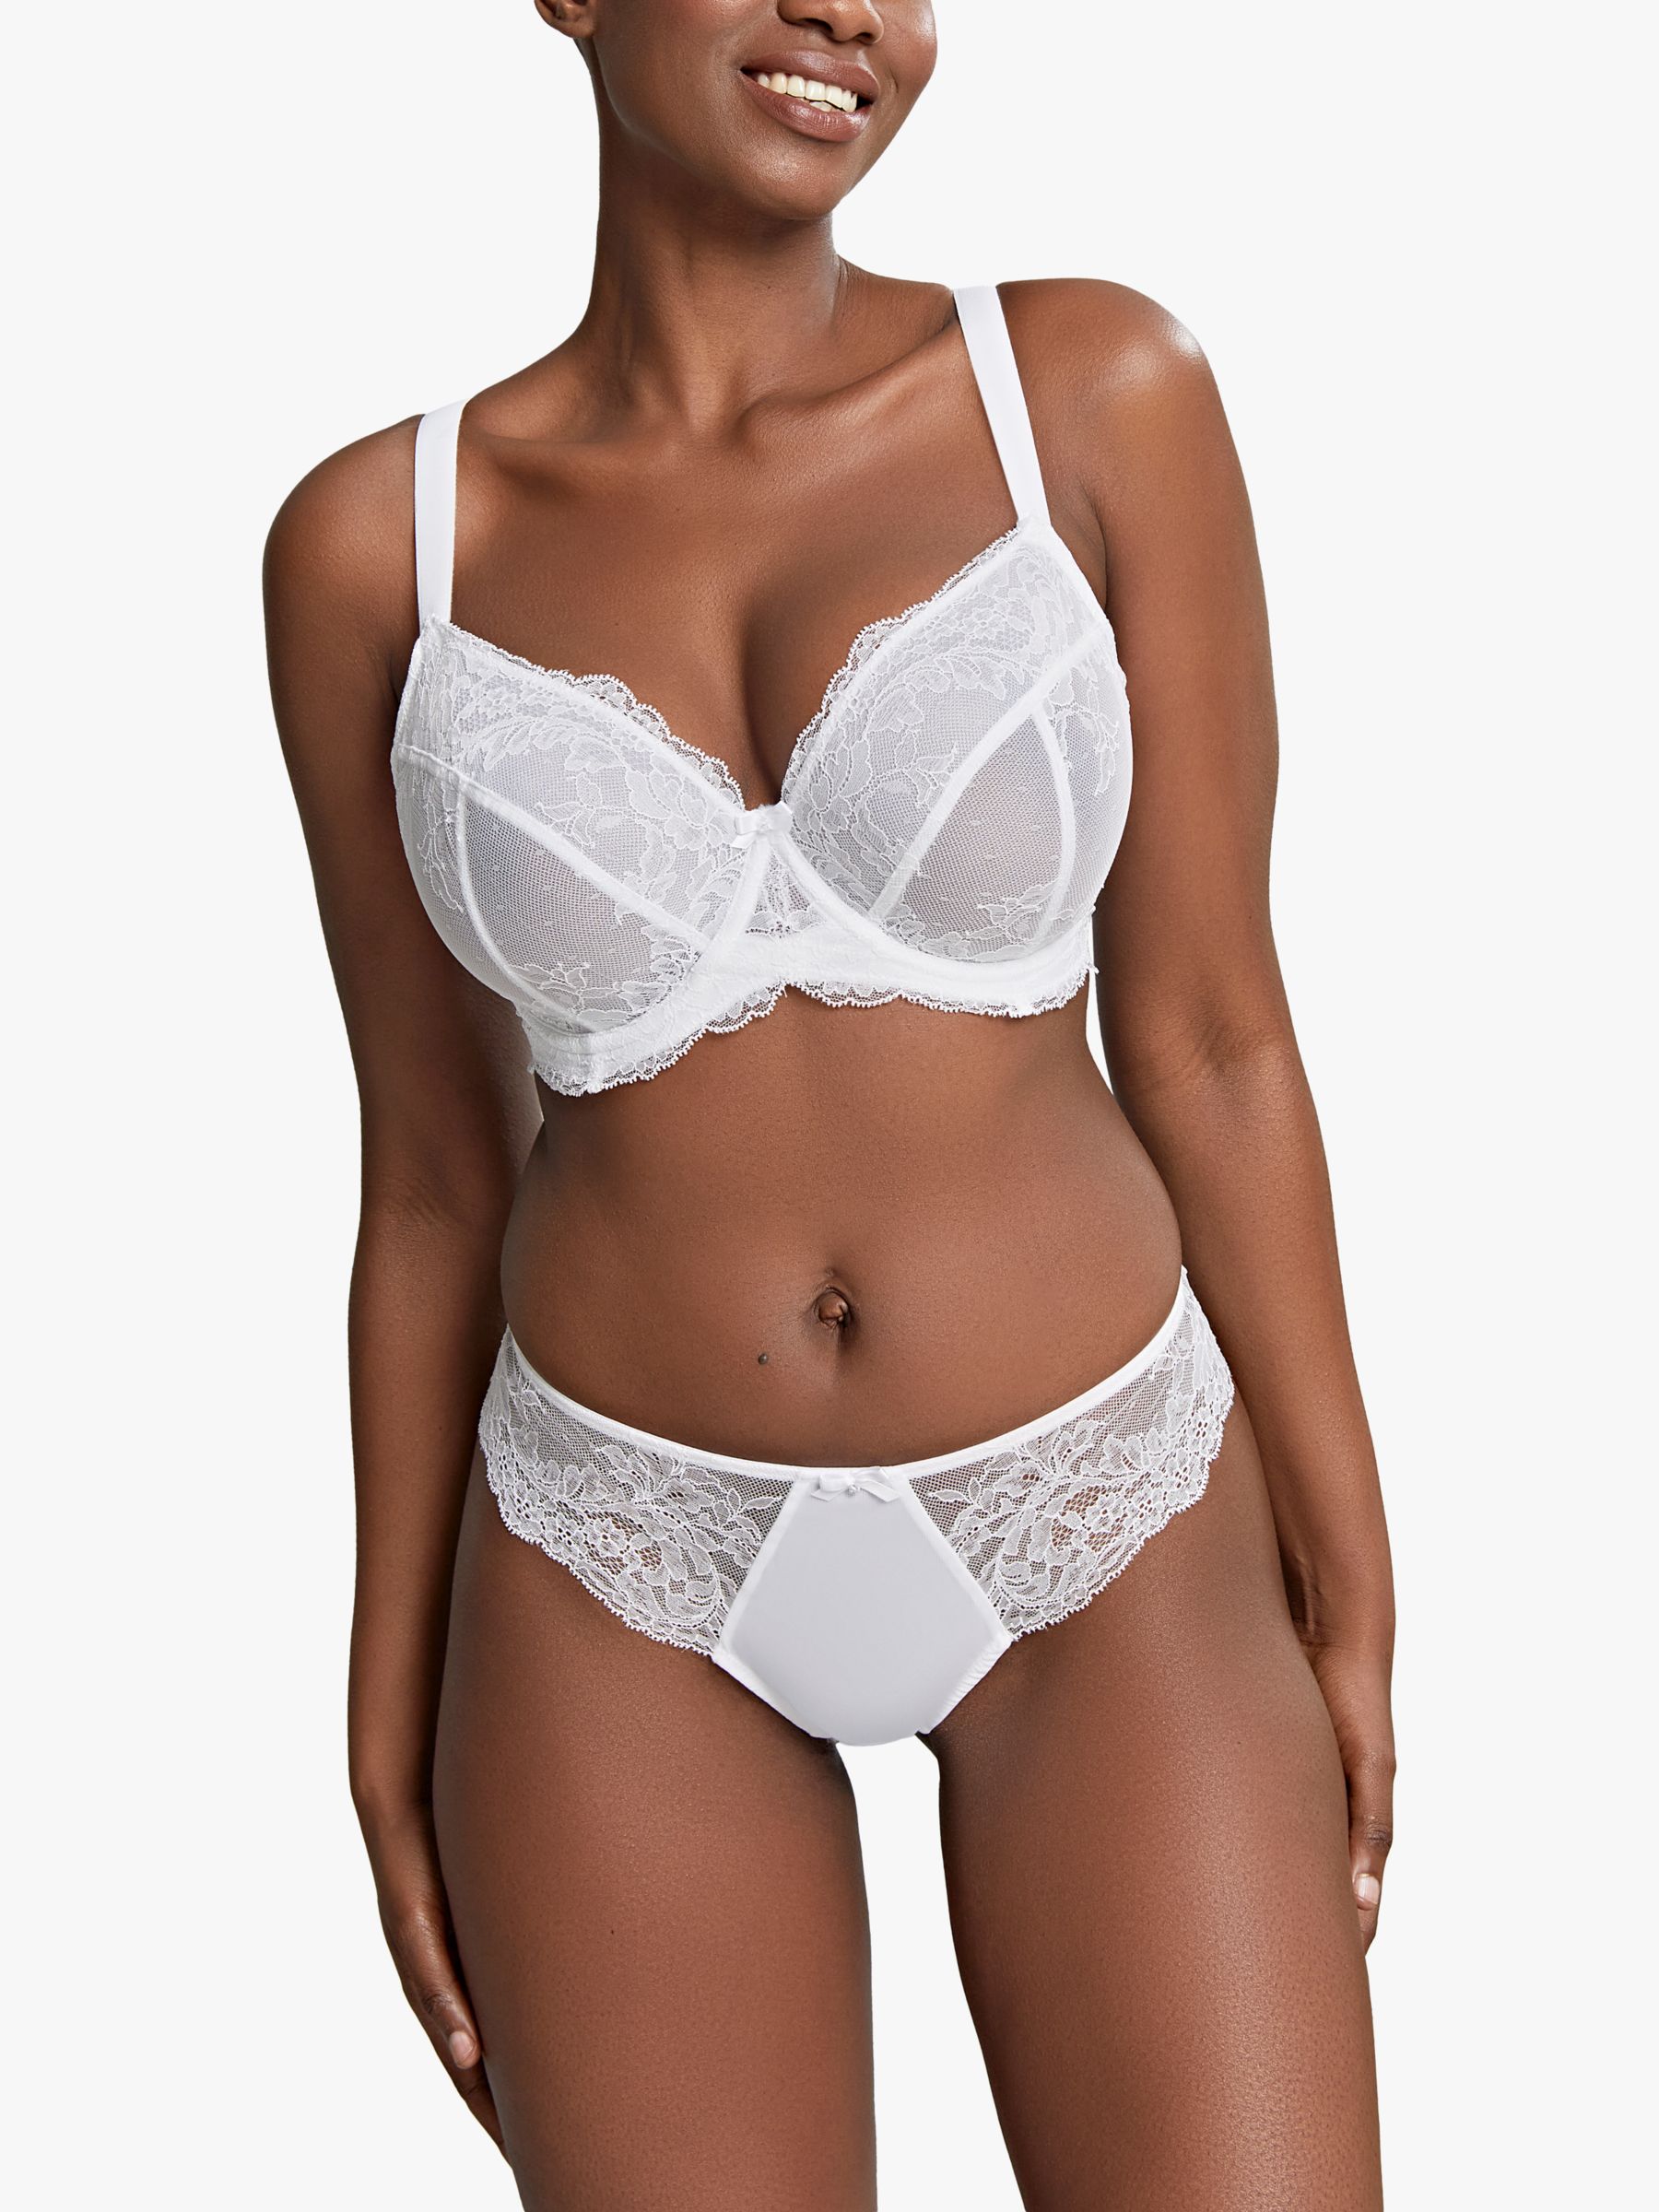 Panache Andorra Underwired Full Cup Bra, Pearl at John Lewis